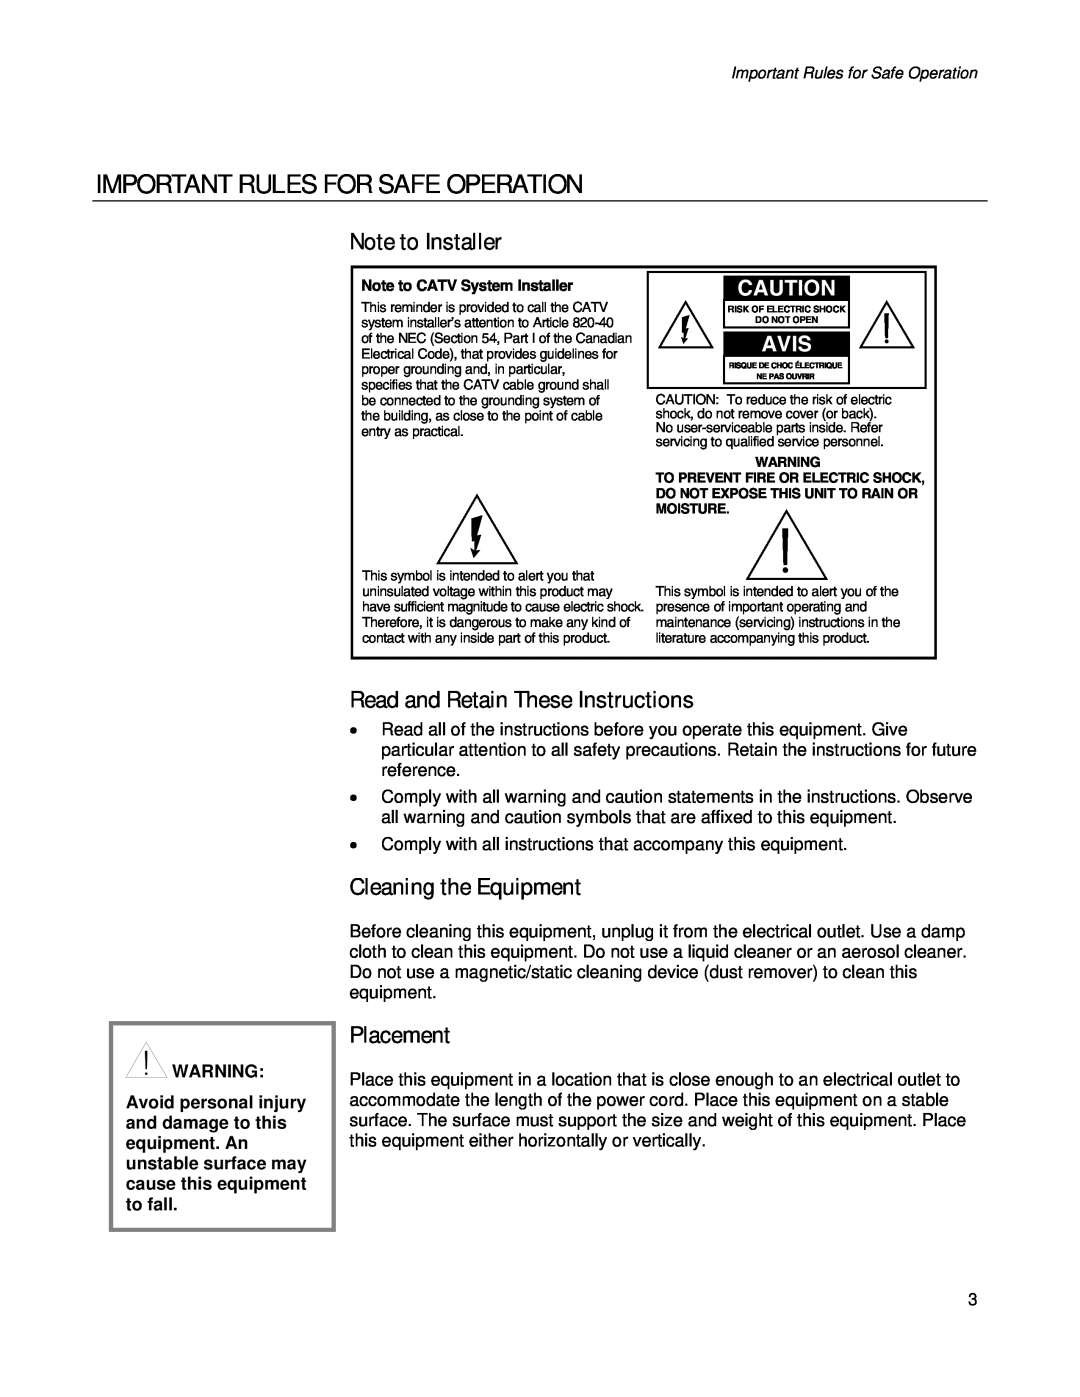 Apple EPR2320TM Important Rules For Safe Operation, Note to Installer, Read and Retain These Instructions, Placement, Avis 